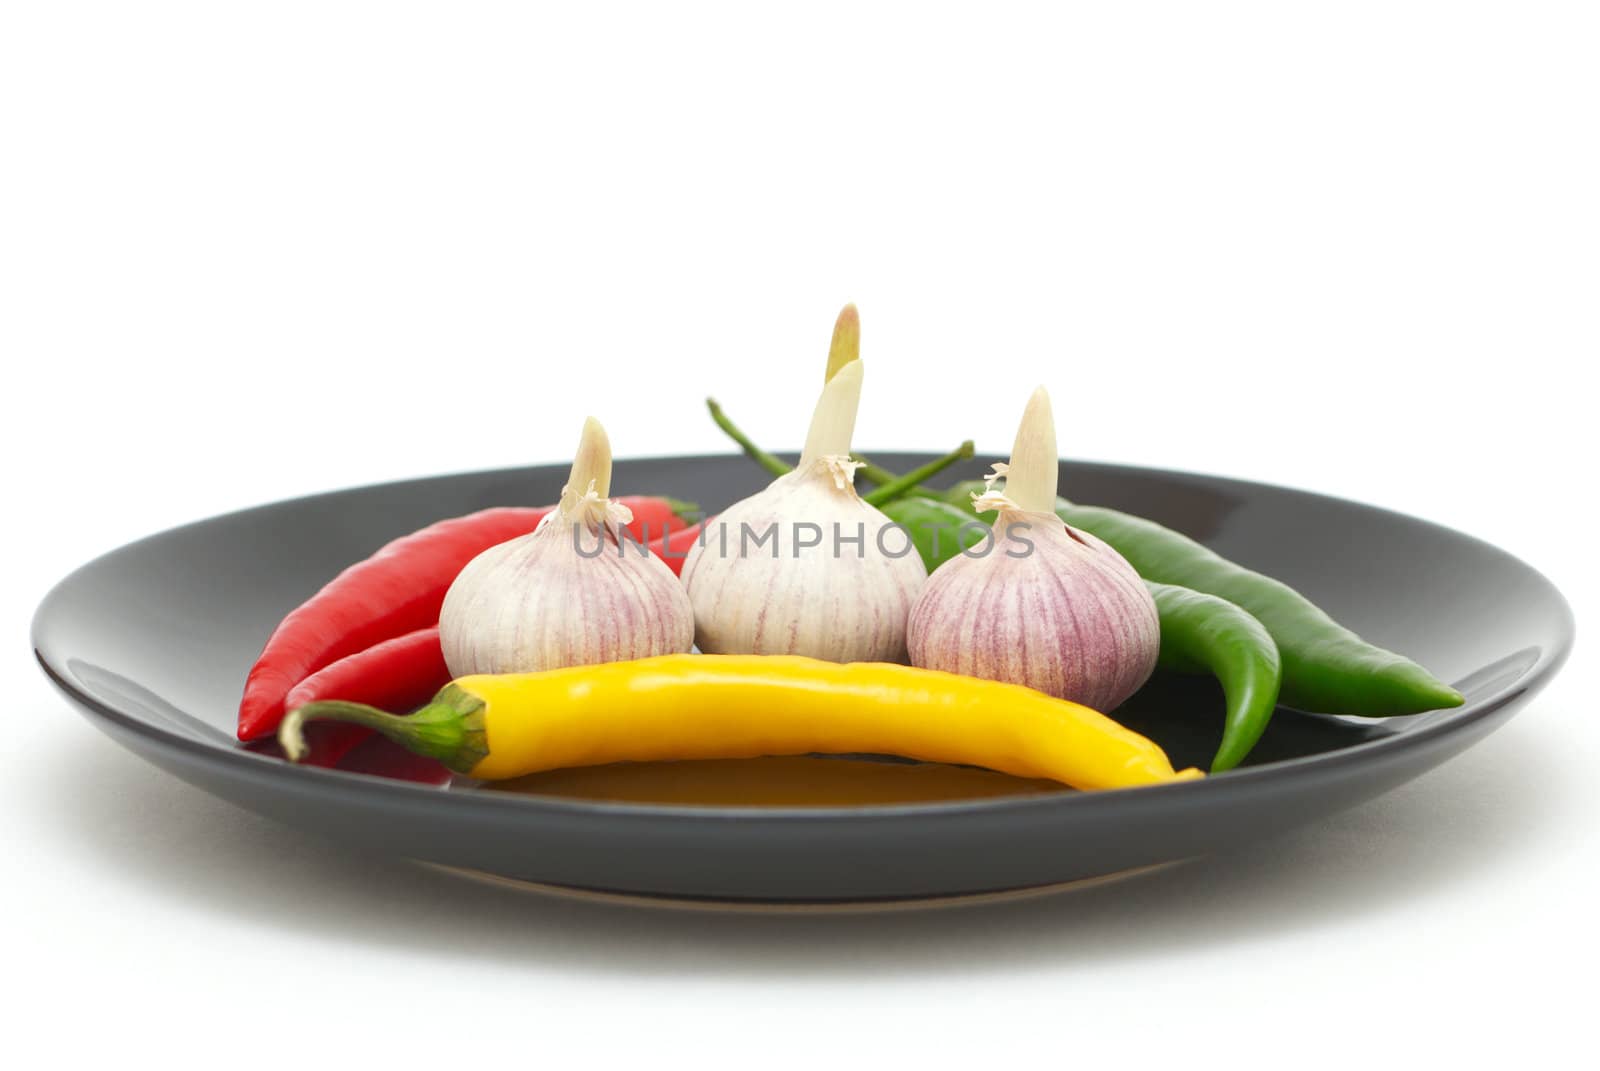 Three garlics with colored chili peppers on a plate